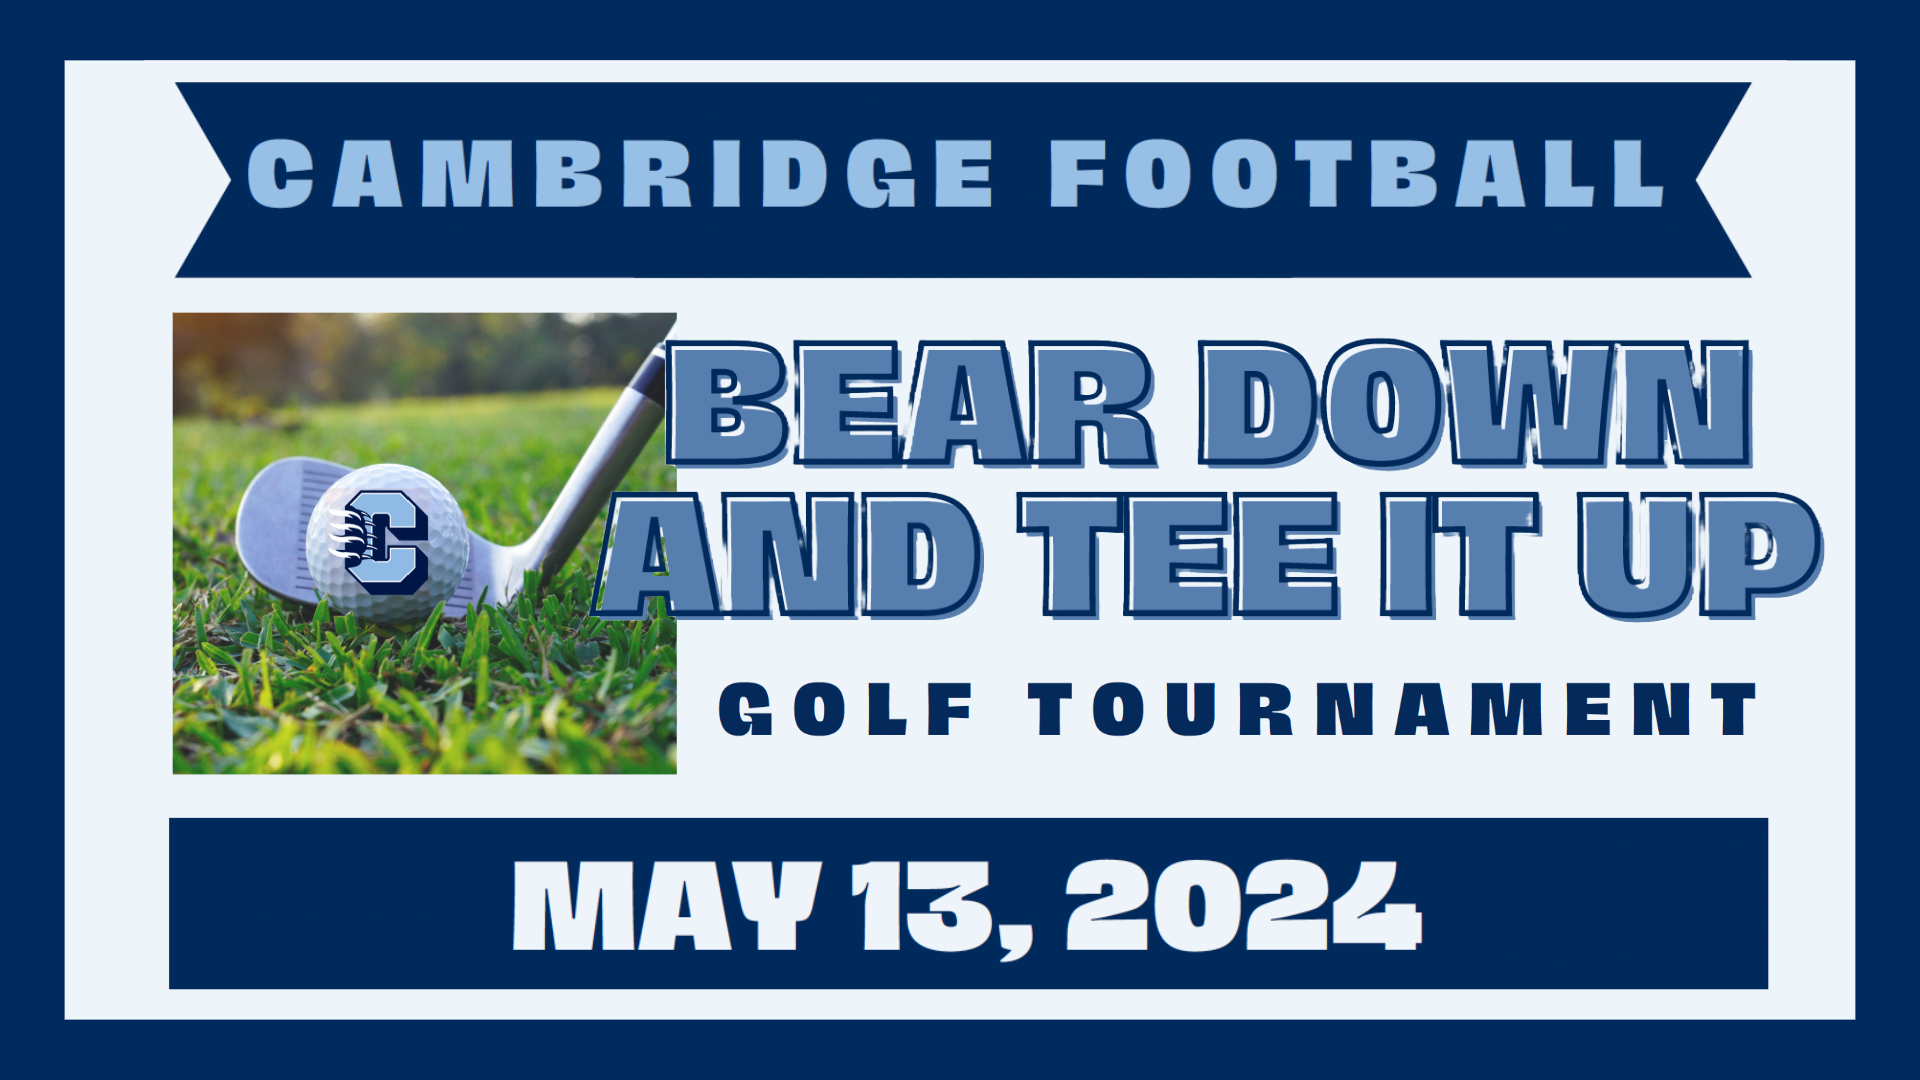 First Annual Cambridge Football Golf Tournament! Register Today!